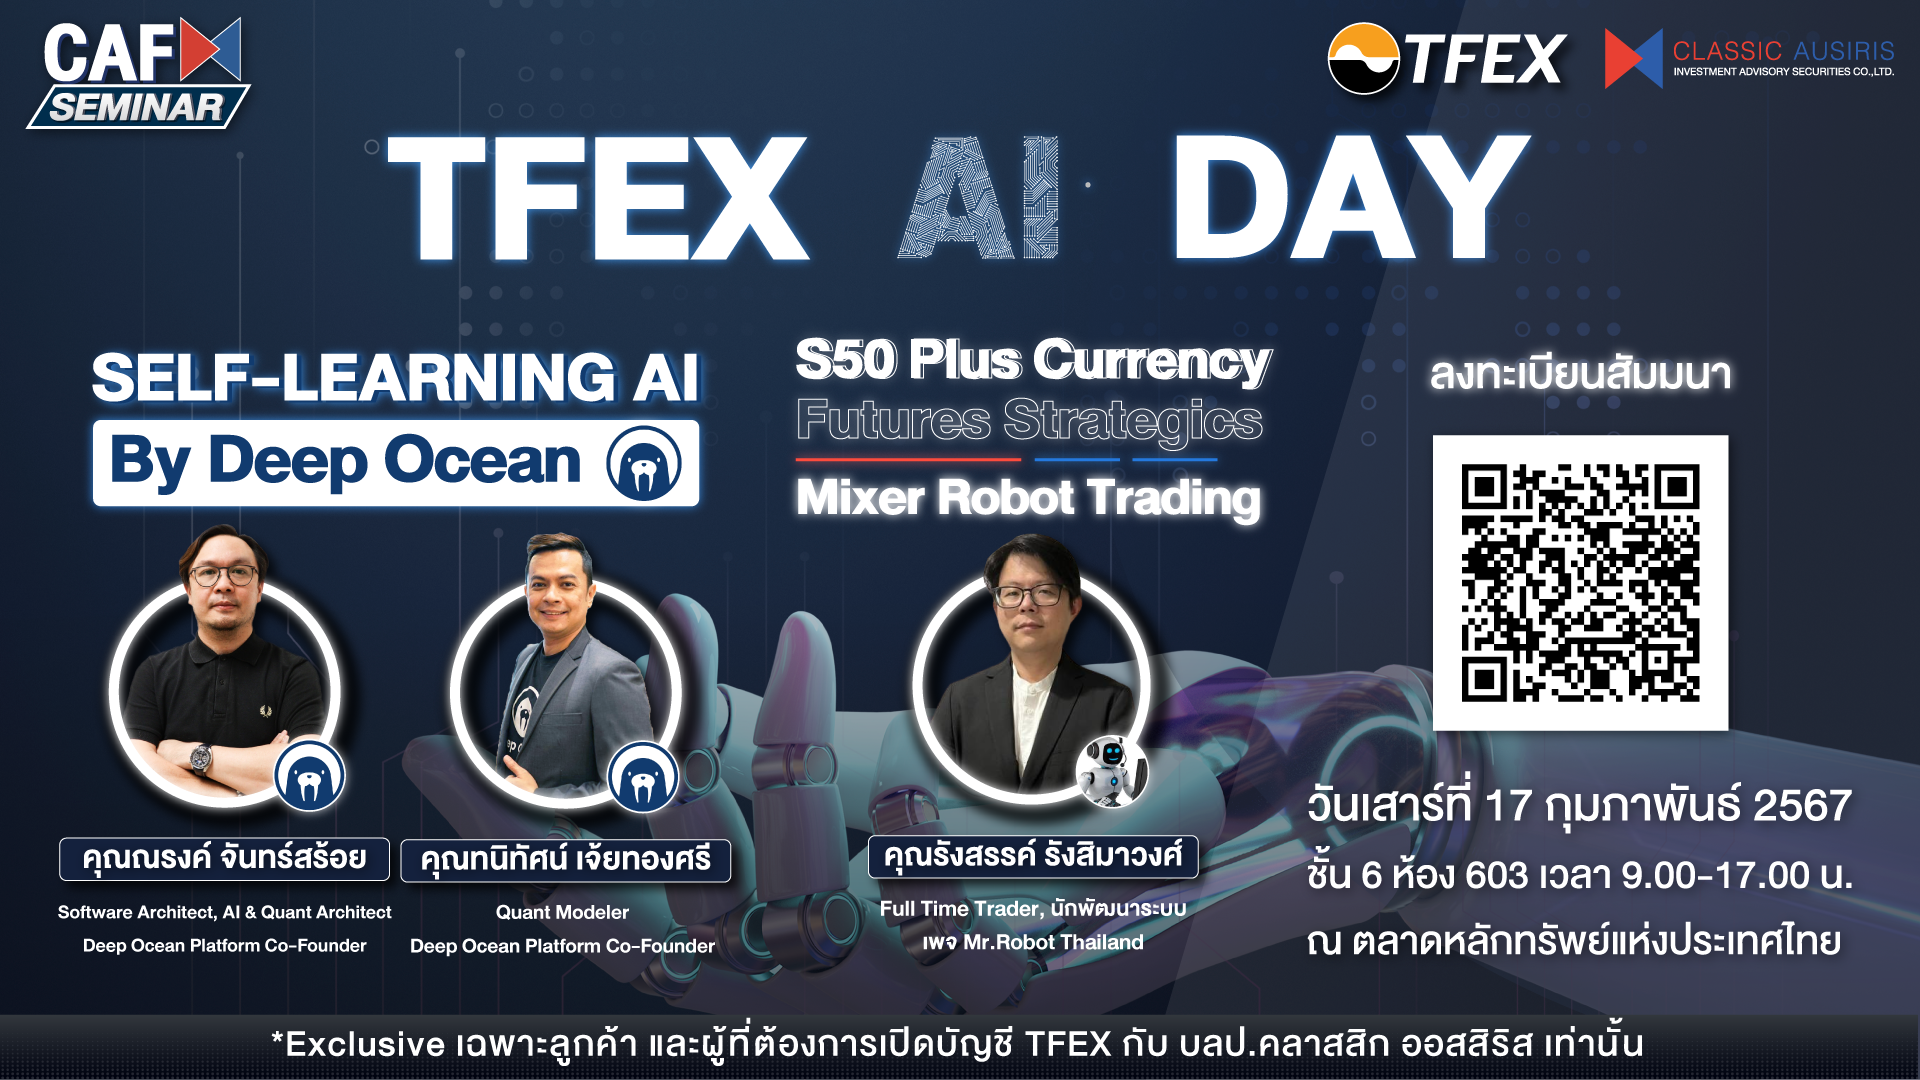 TFEX AI DAY : Self-Learning AI by Deep Ocean / S50 Plus Currenecy Futures Strategics Mixer Robot Trading 